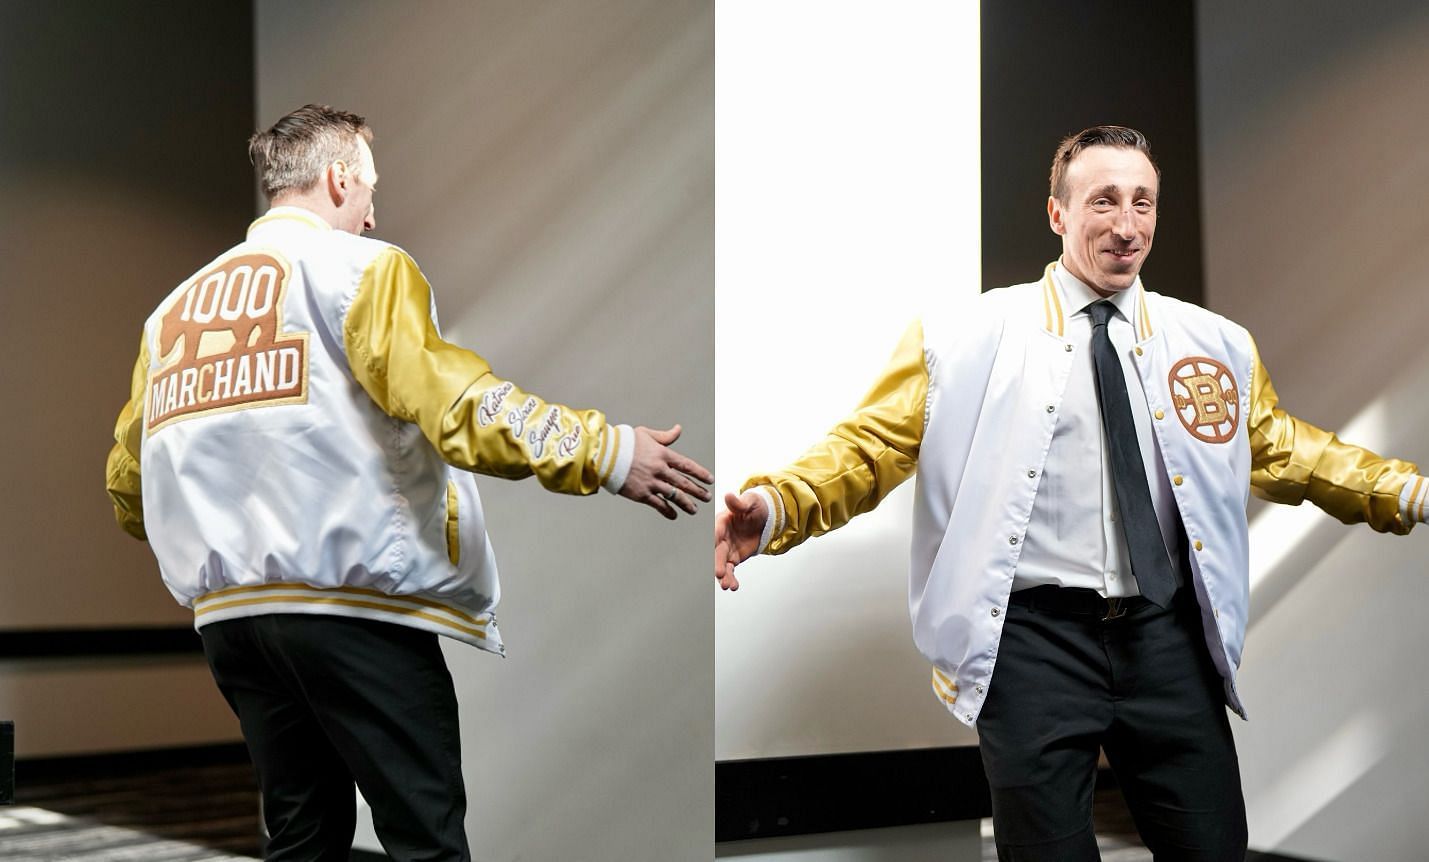 IN PHOTOS: Brad Marchand reveals special gold jacket as Bruins captain gears up to celebrate 1,000th NHL game milestone